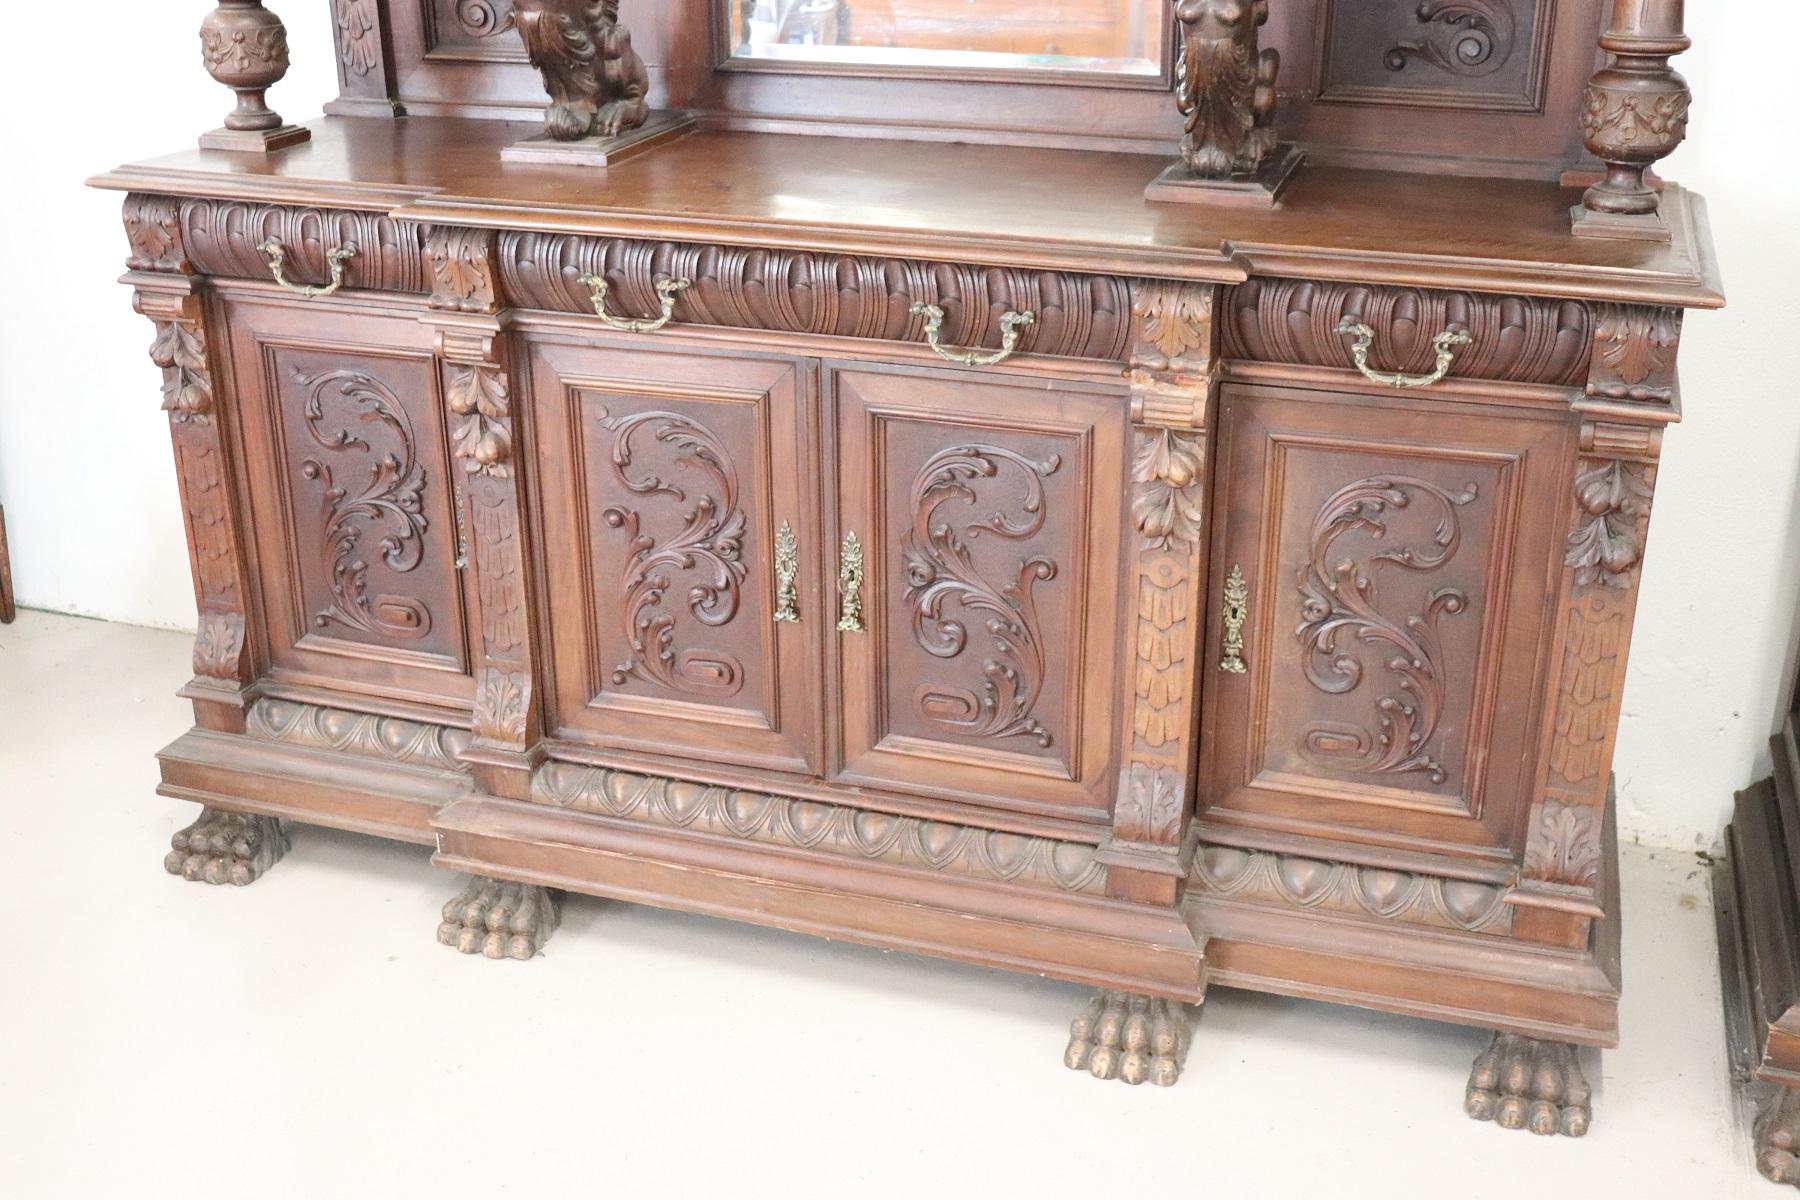 Impressive antique 19th century Italian Renaissance style large sideboard. Made entirely of carved walnut wood. The carving work is spectacular made by a great master of wood. We ask you to look at each image in detail to understand the importance